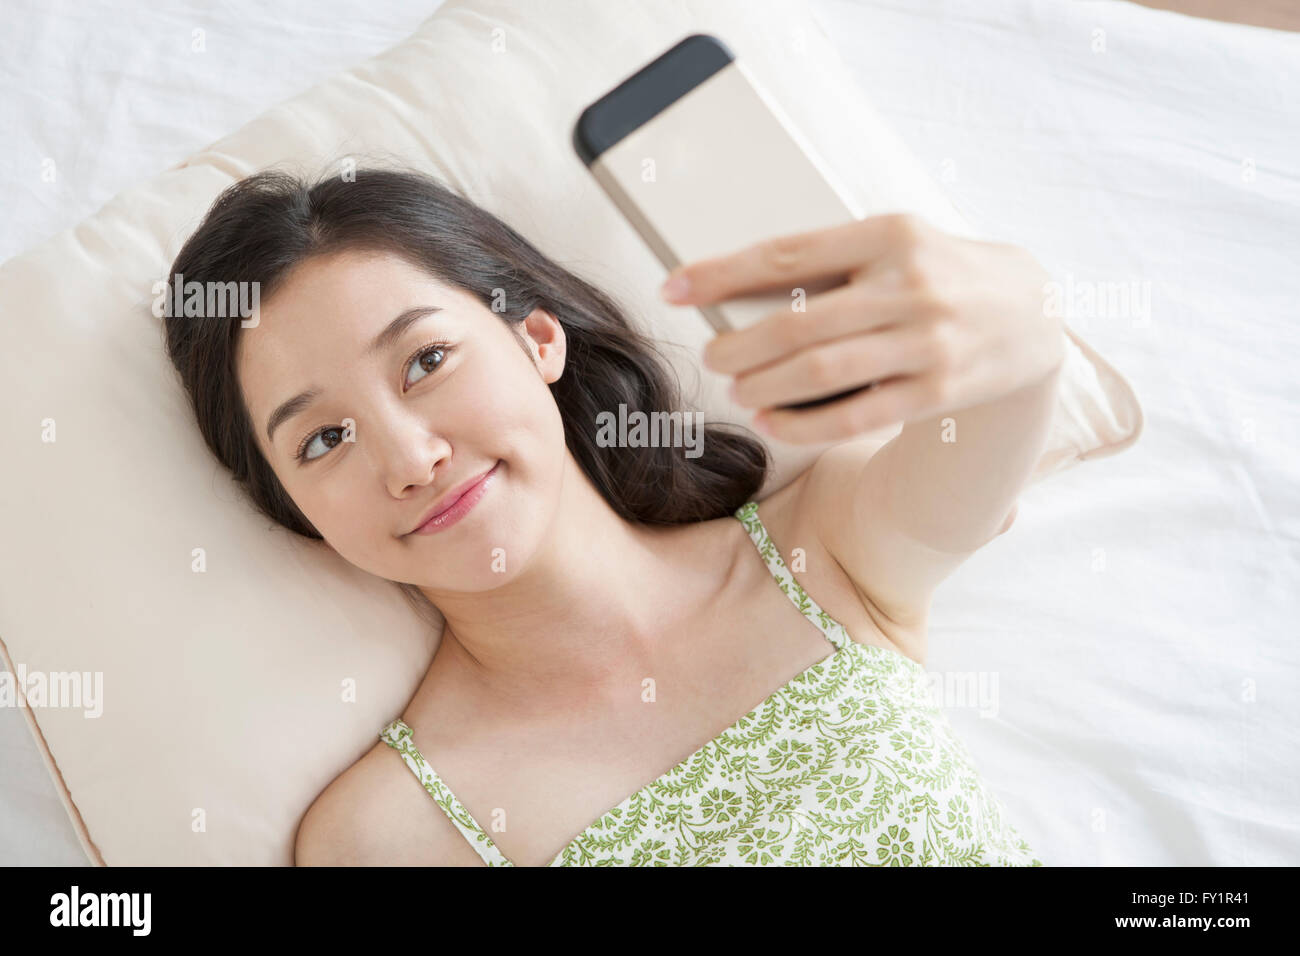 Portrait of young smiling woman taking picture of herself lying down on bed Stock Photo